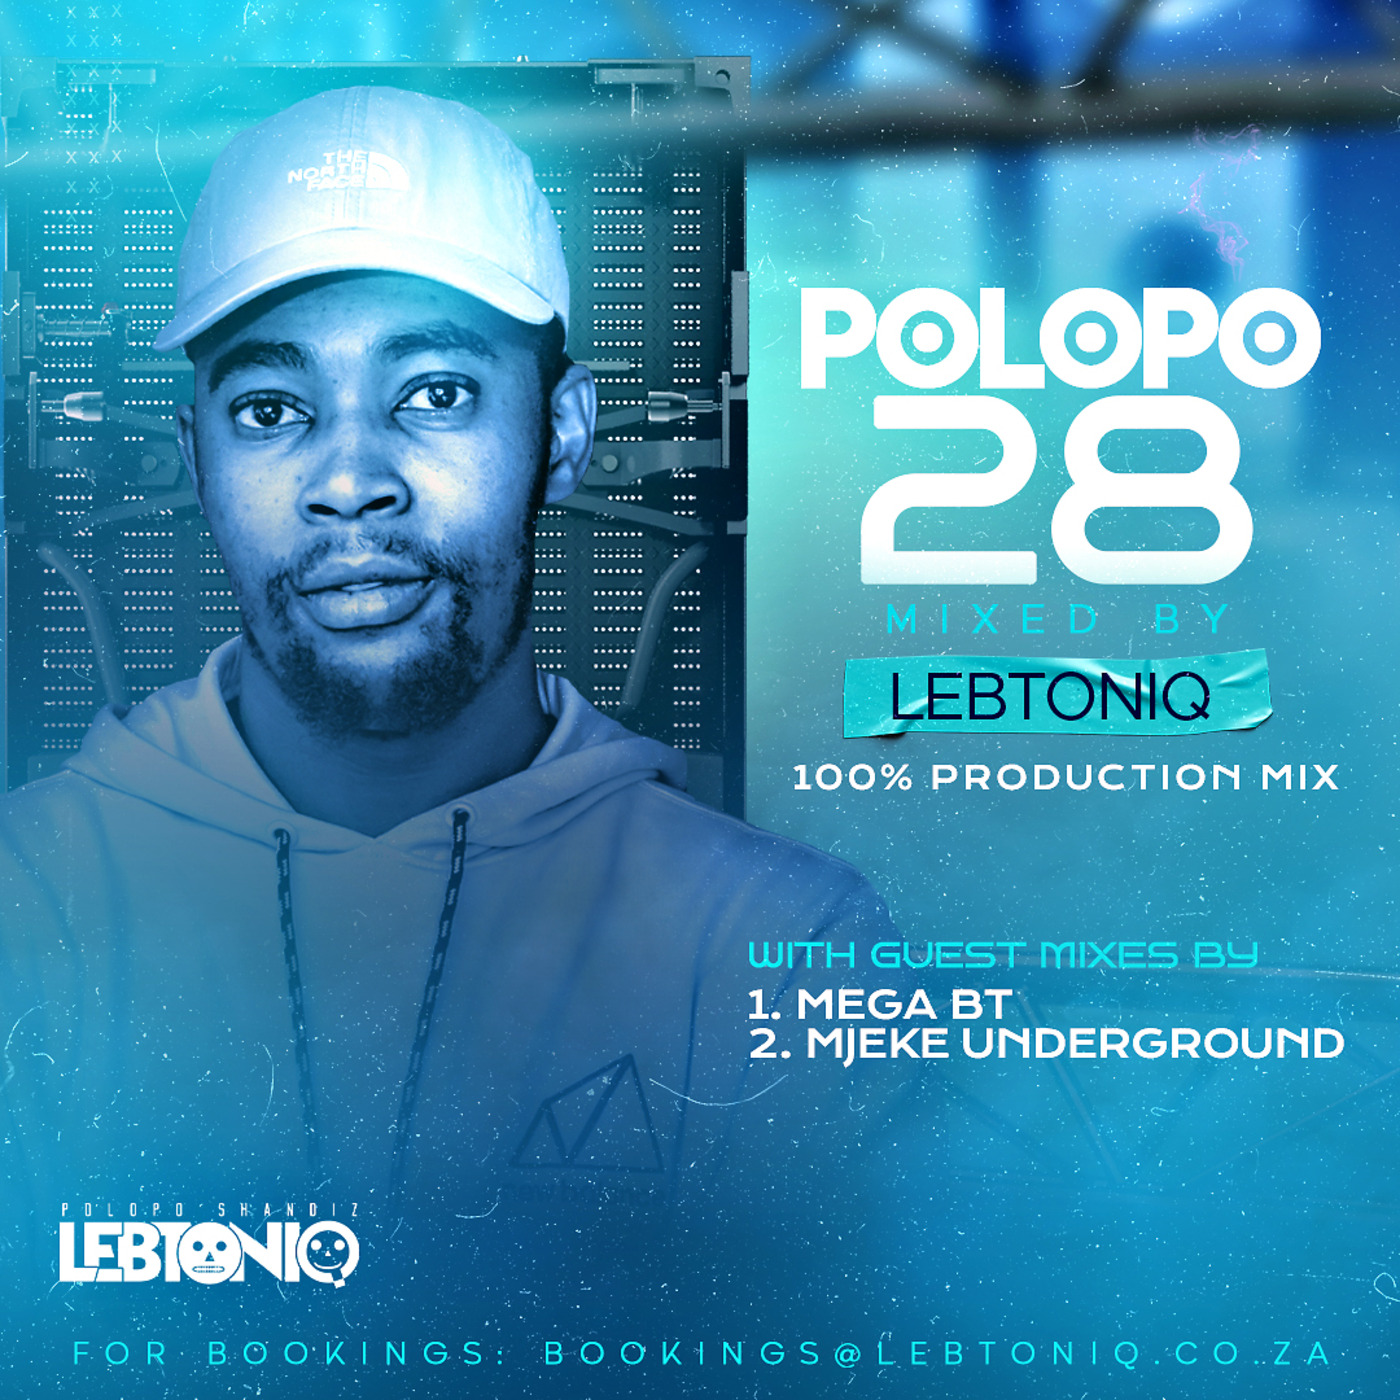 POLOPO 28 Mixed By MEGA BT